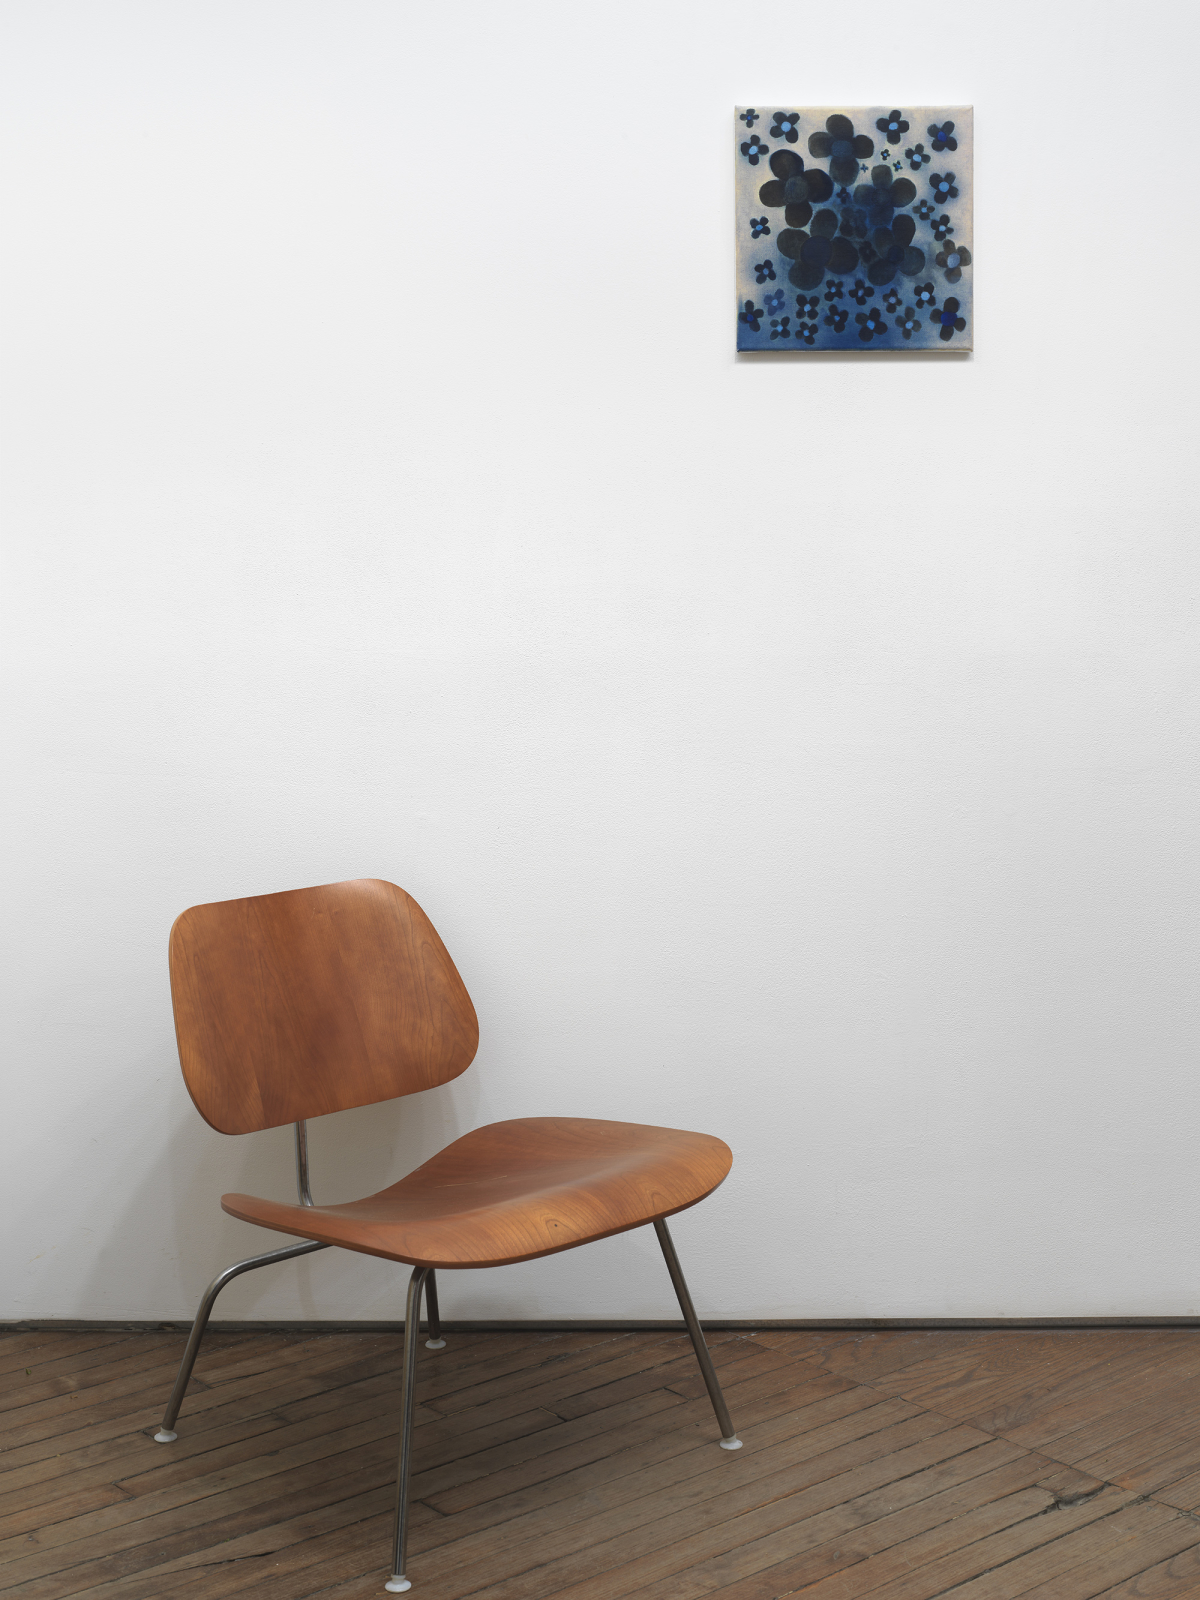 A small square abstract painting depicting graphic flowers in black and blue. Below is a chair. 